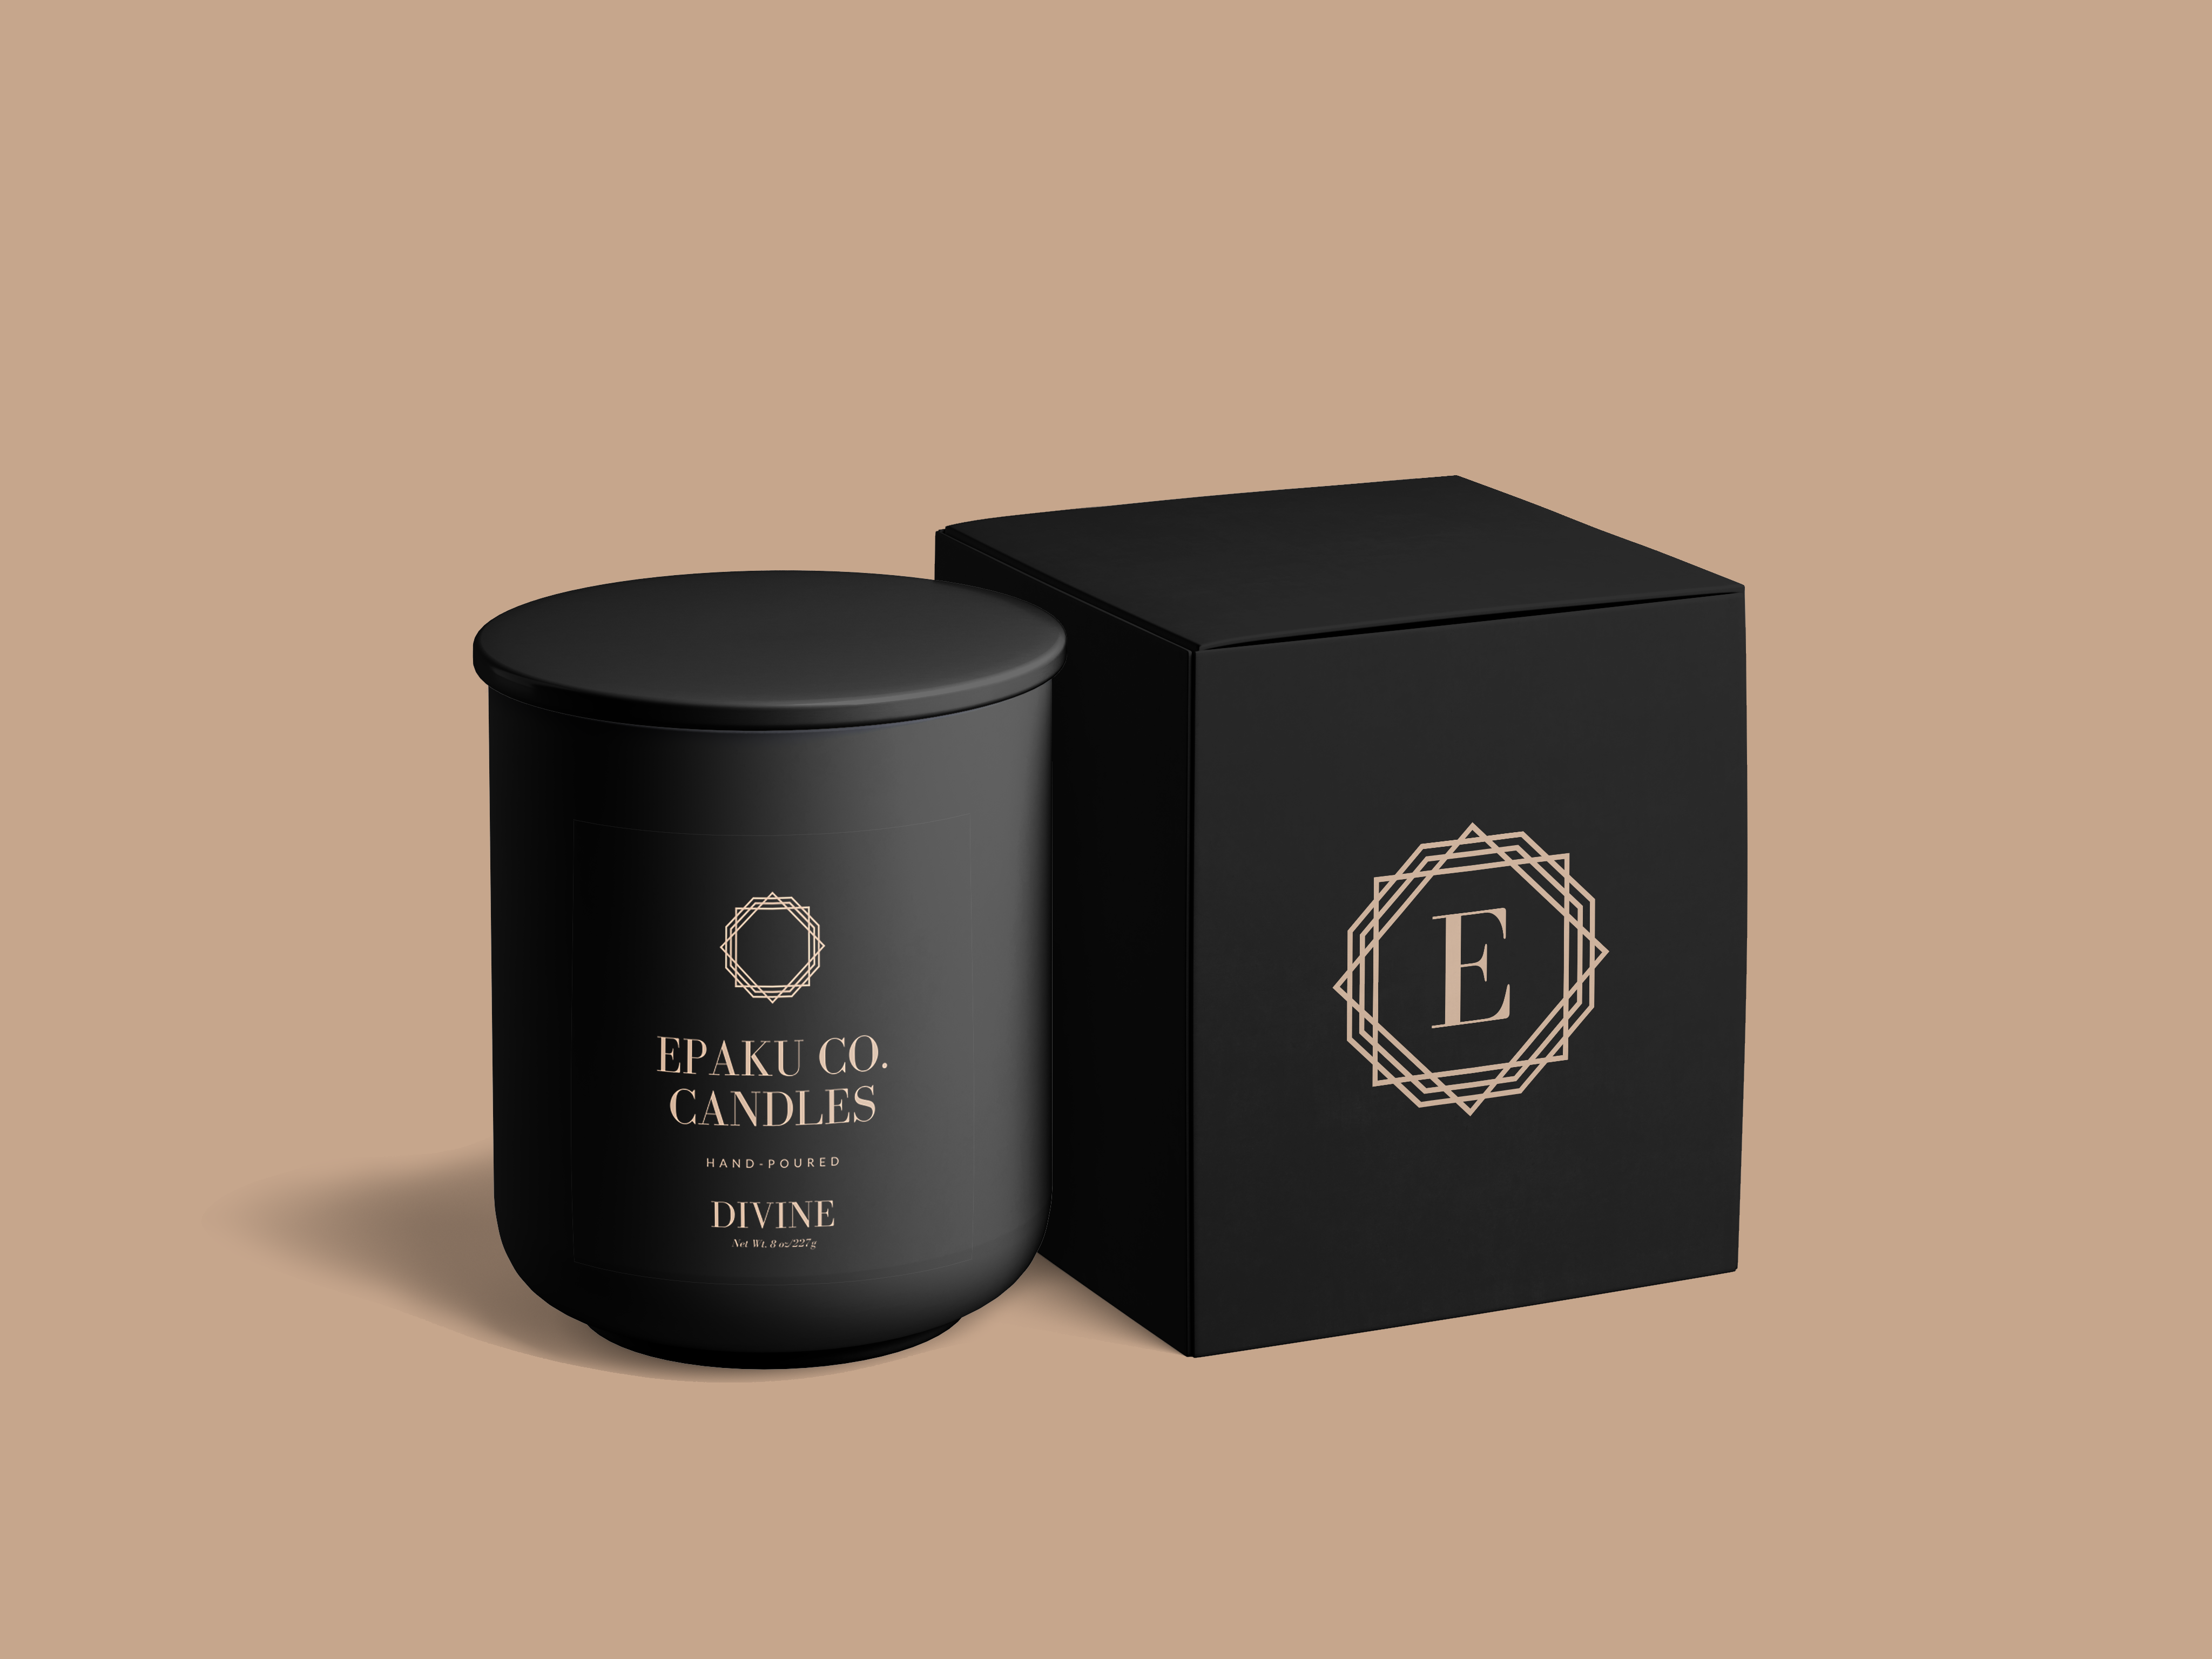 All black candle vessel with Black box. Box is embelleshed with a golden symbol, that has an E in the middle of the symbol. All of this is on a golden beige background